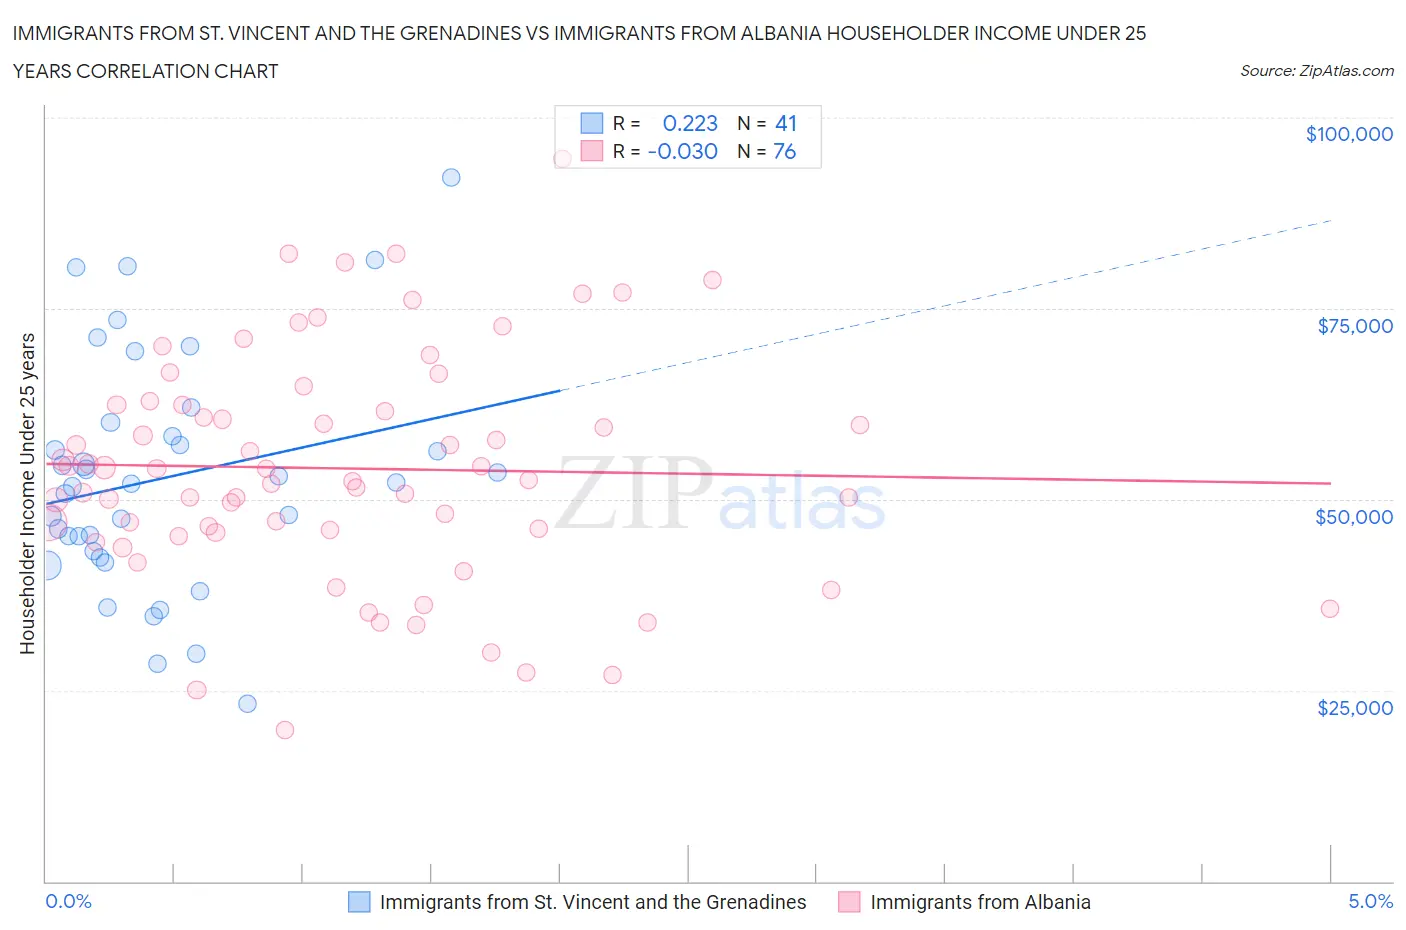 Immigrants from St. Vincent and the Grenadines vs Immigrants from Albania Householder Income Under 25 years